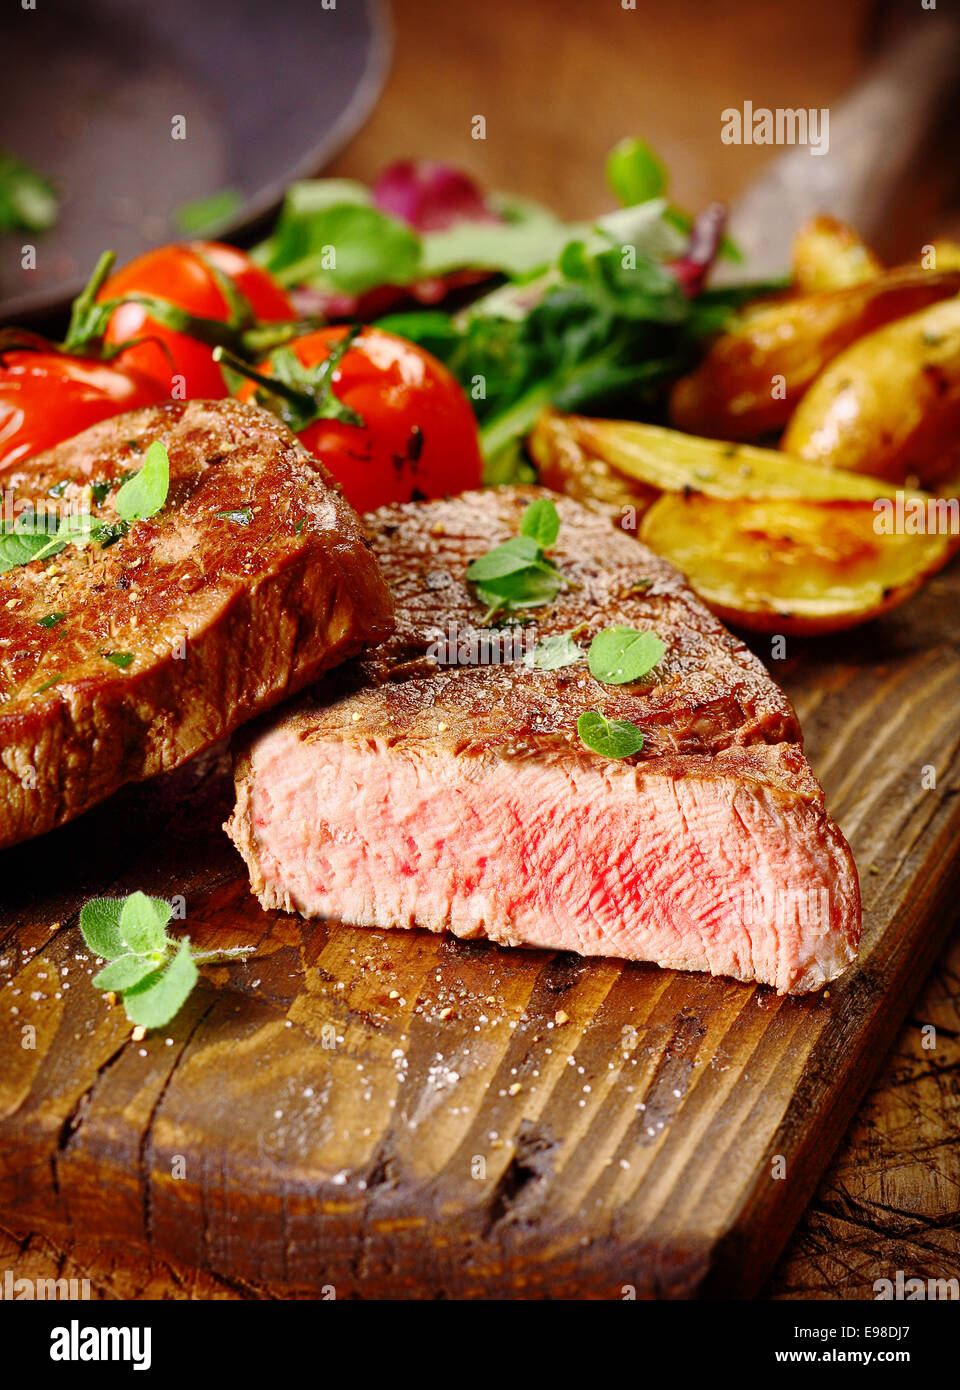 Portion of healthy lean grilled beef steak sliced through to reveal the rare interior served on a wooden board with roast vegetables Stock Photo